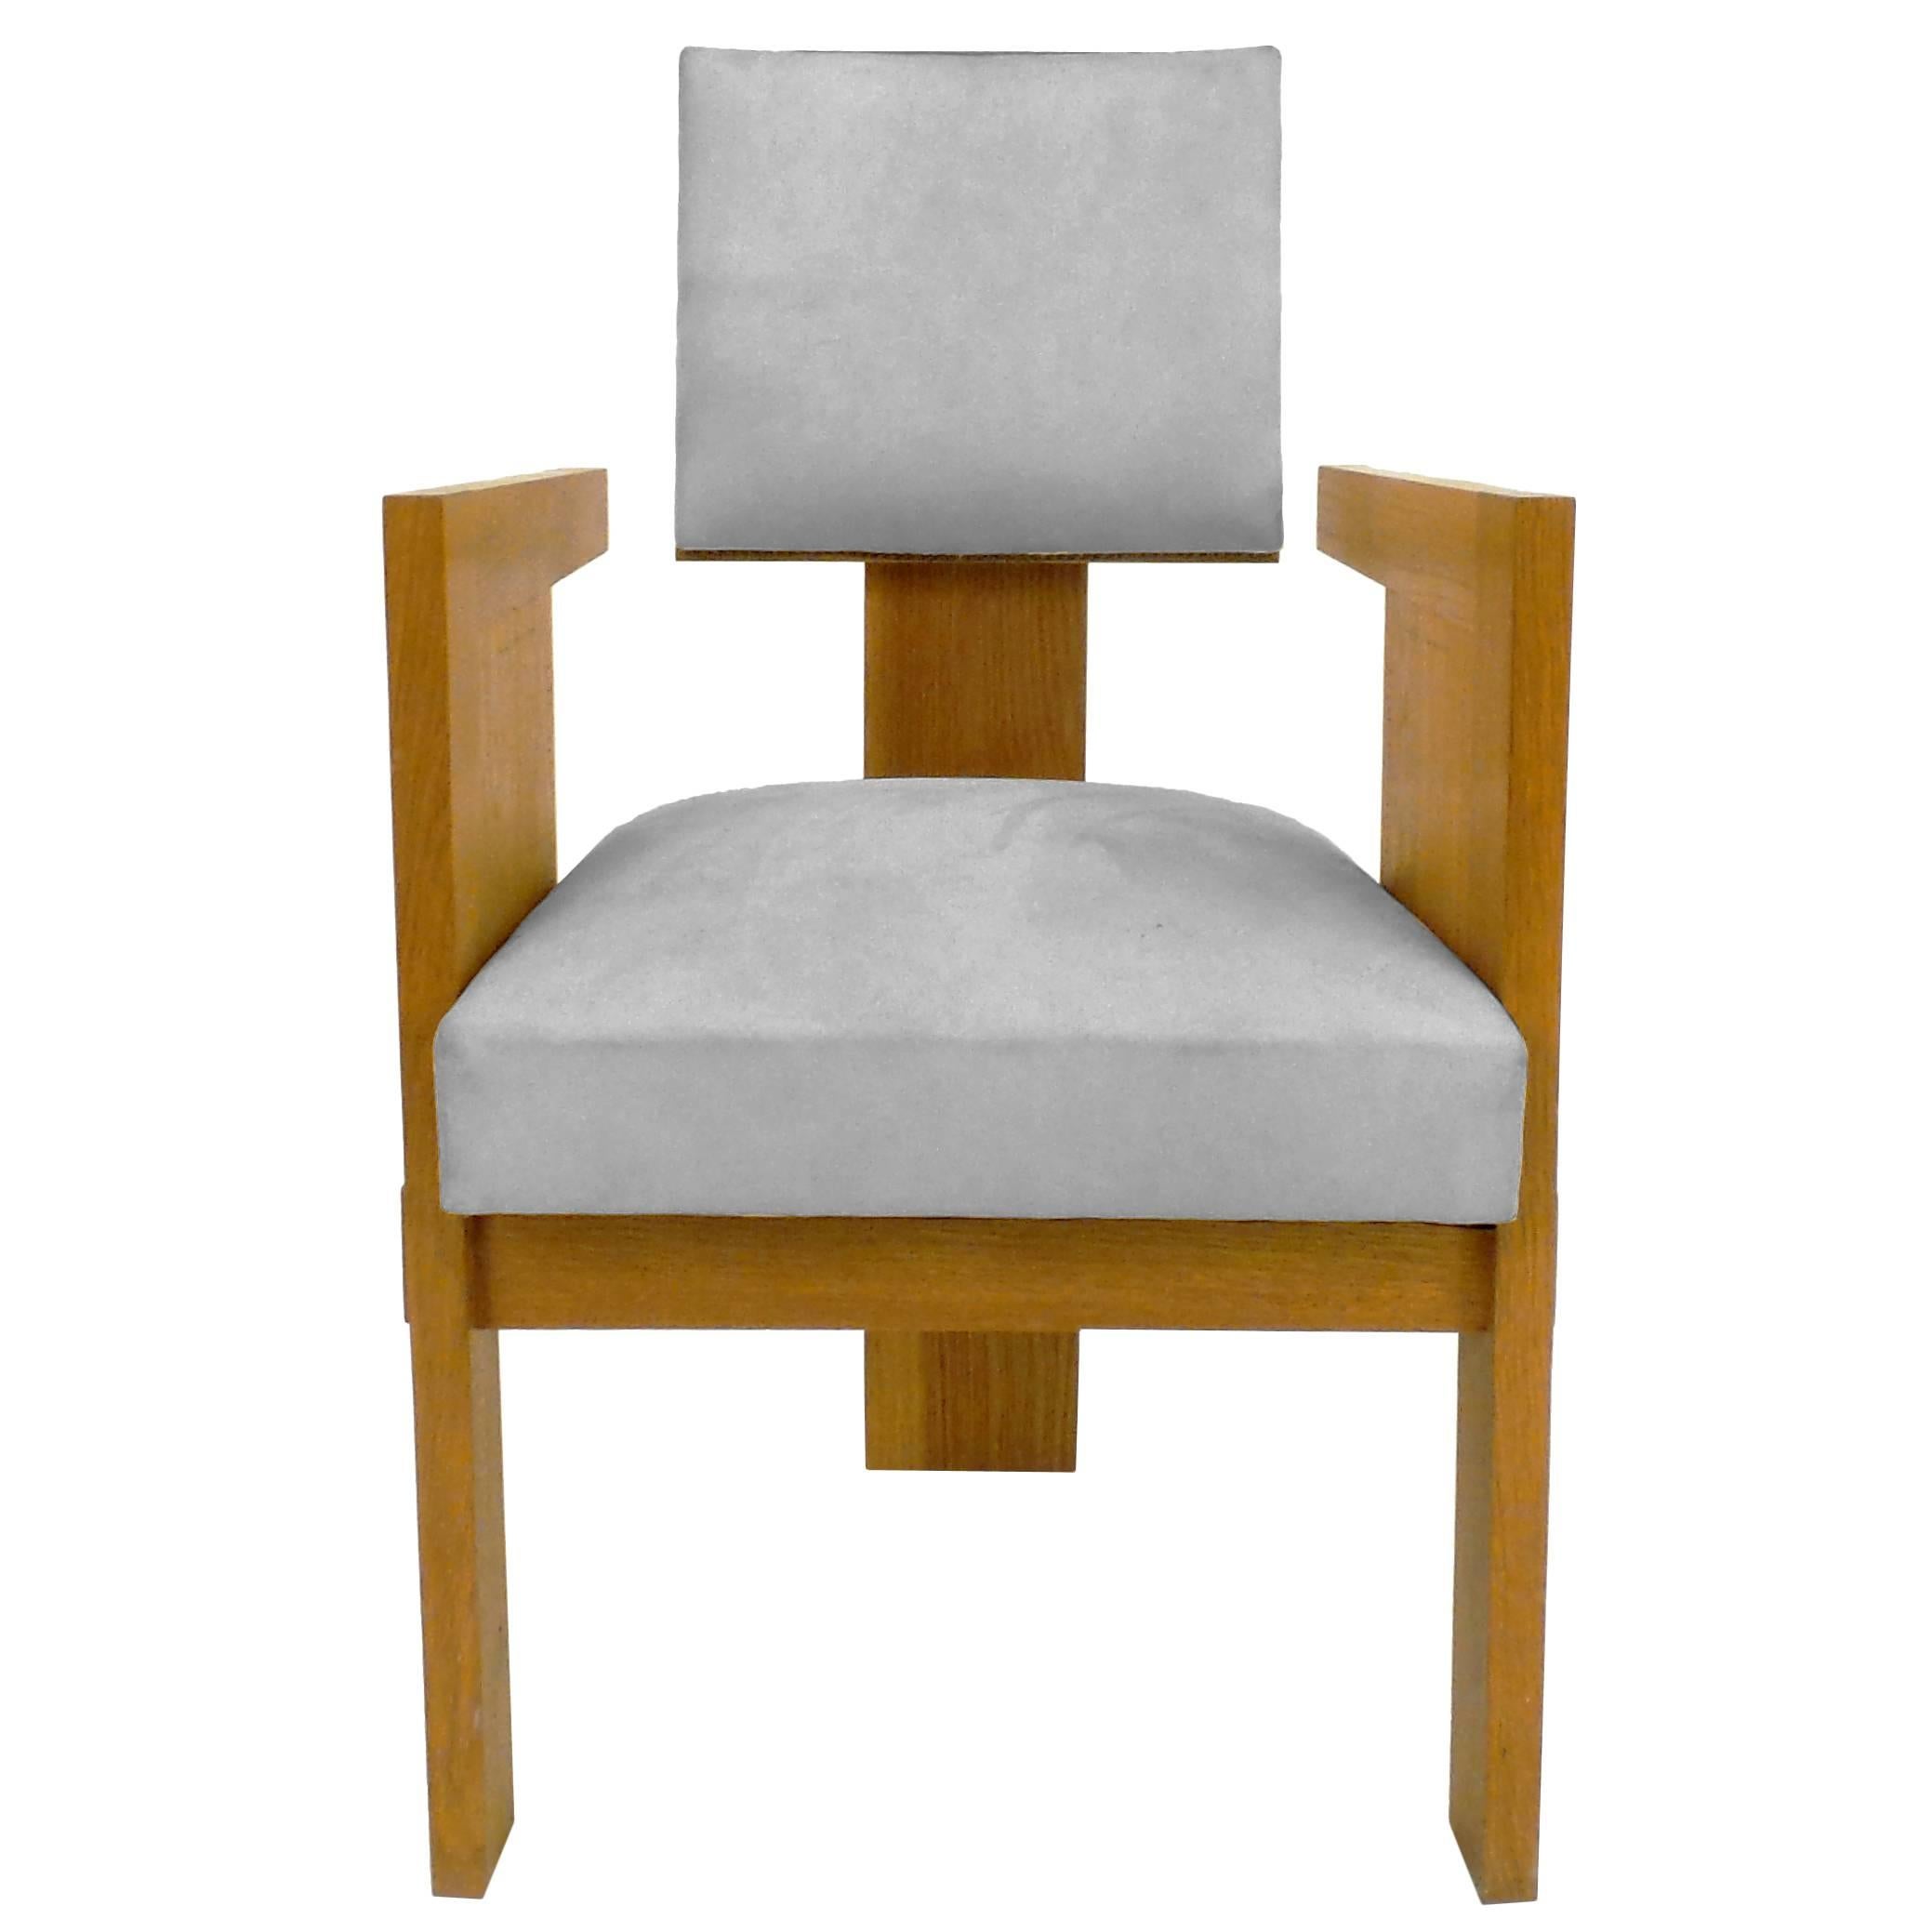 A most unusual Art Deco chair model designed by Andre Sornay, circa 1932 in Lyons, France. Executed in white oak with brass details and Sornay's signature brass studs (cloutage). Custom versions available. Also available as side chair (please